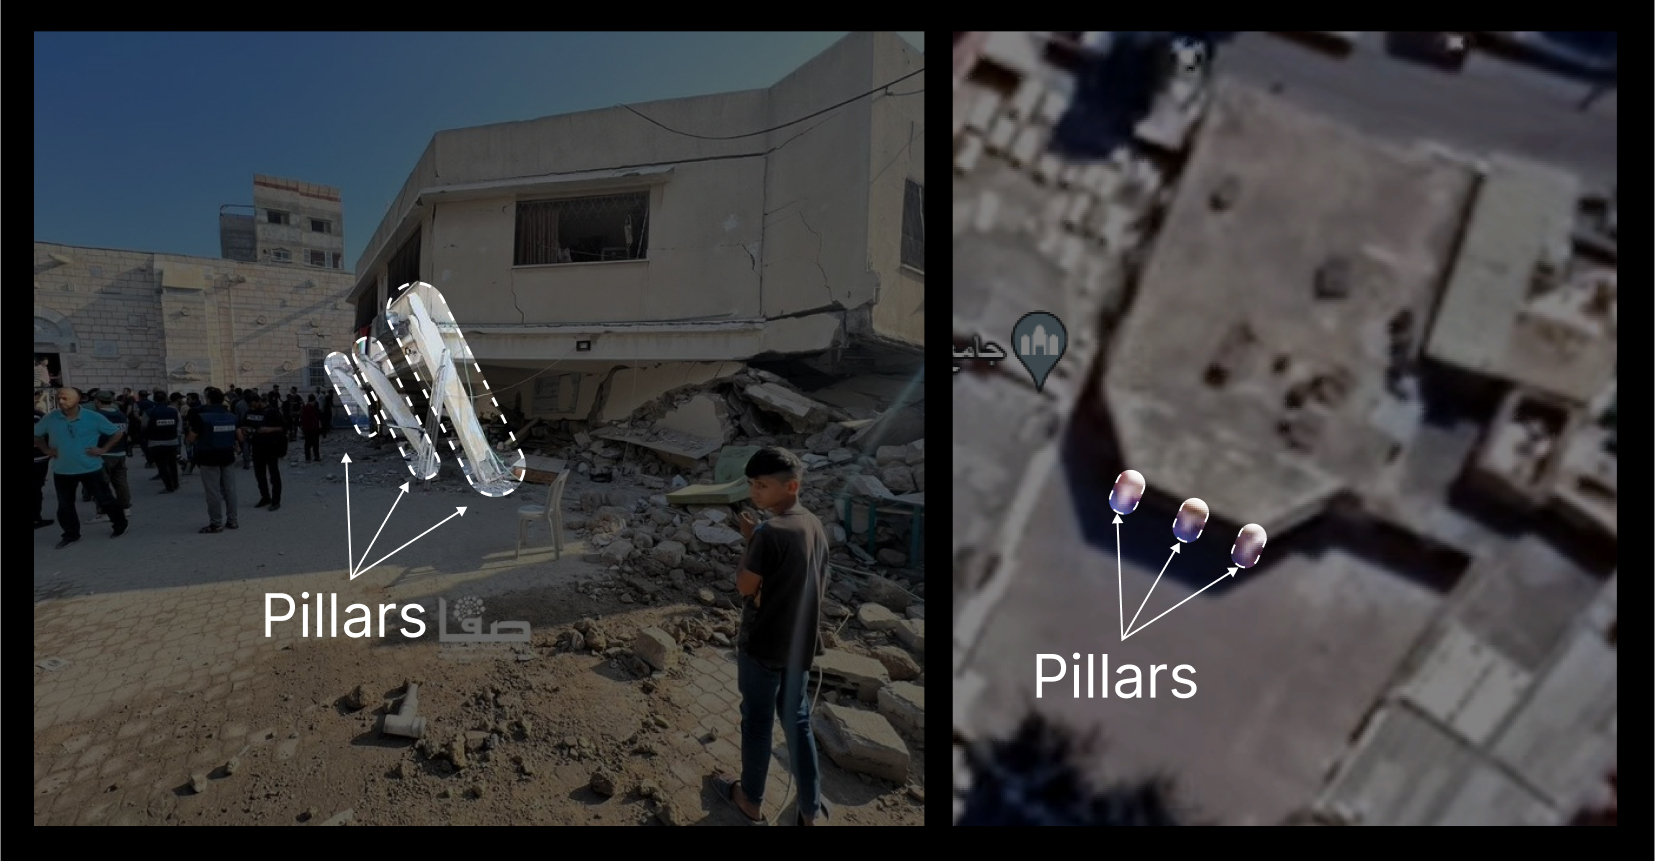 Right: Satellite imagery of the building that was impacted by the airstrike. Top: the three pillars of the building impacted by the airstrike.